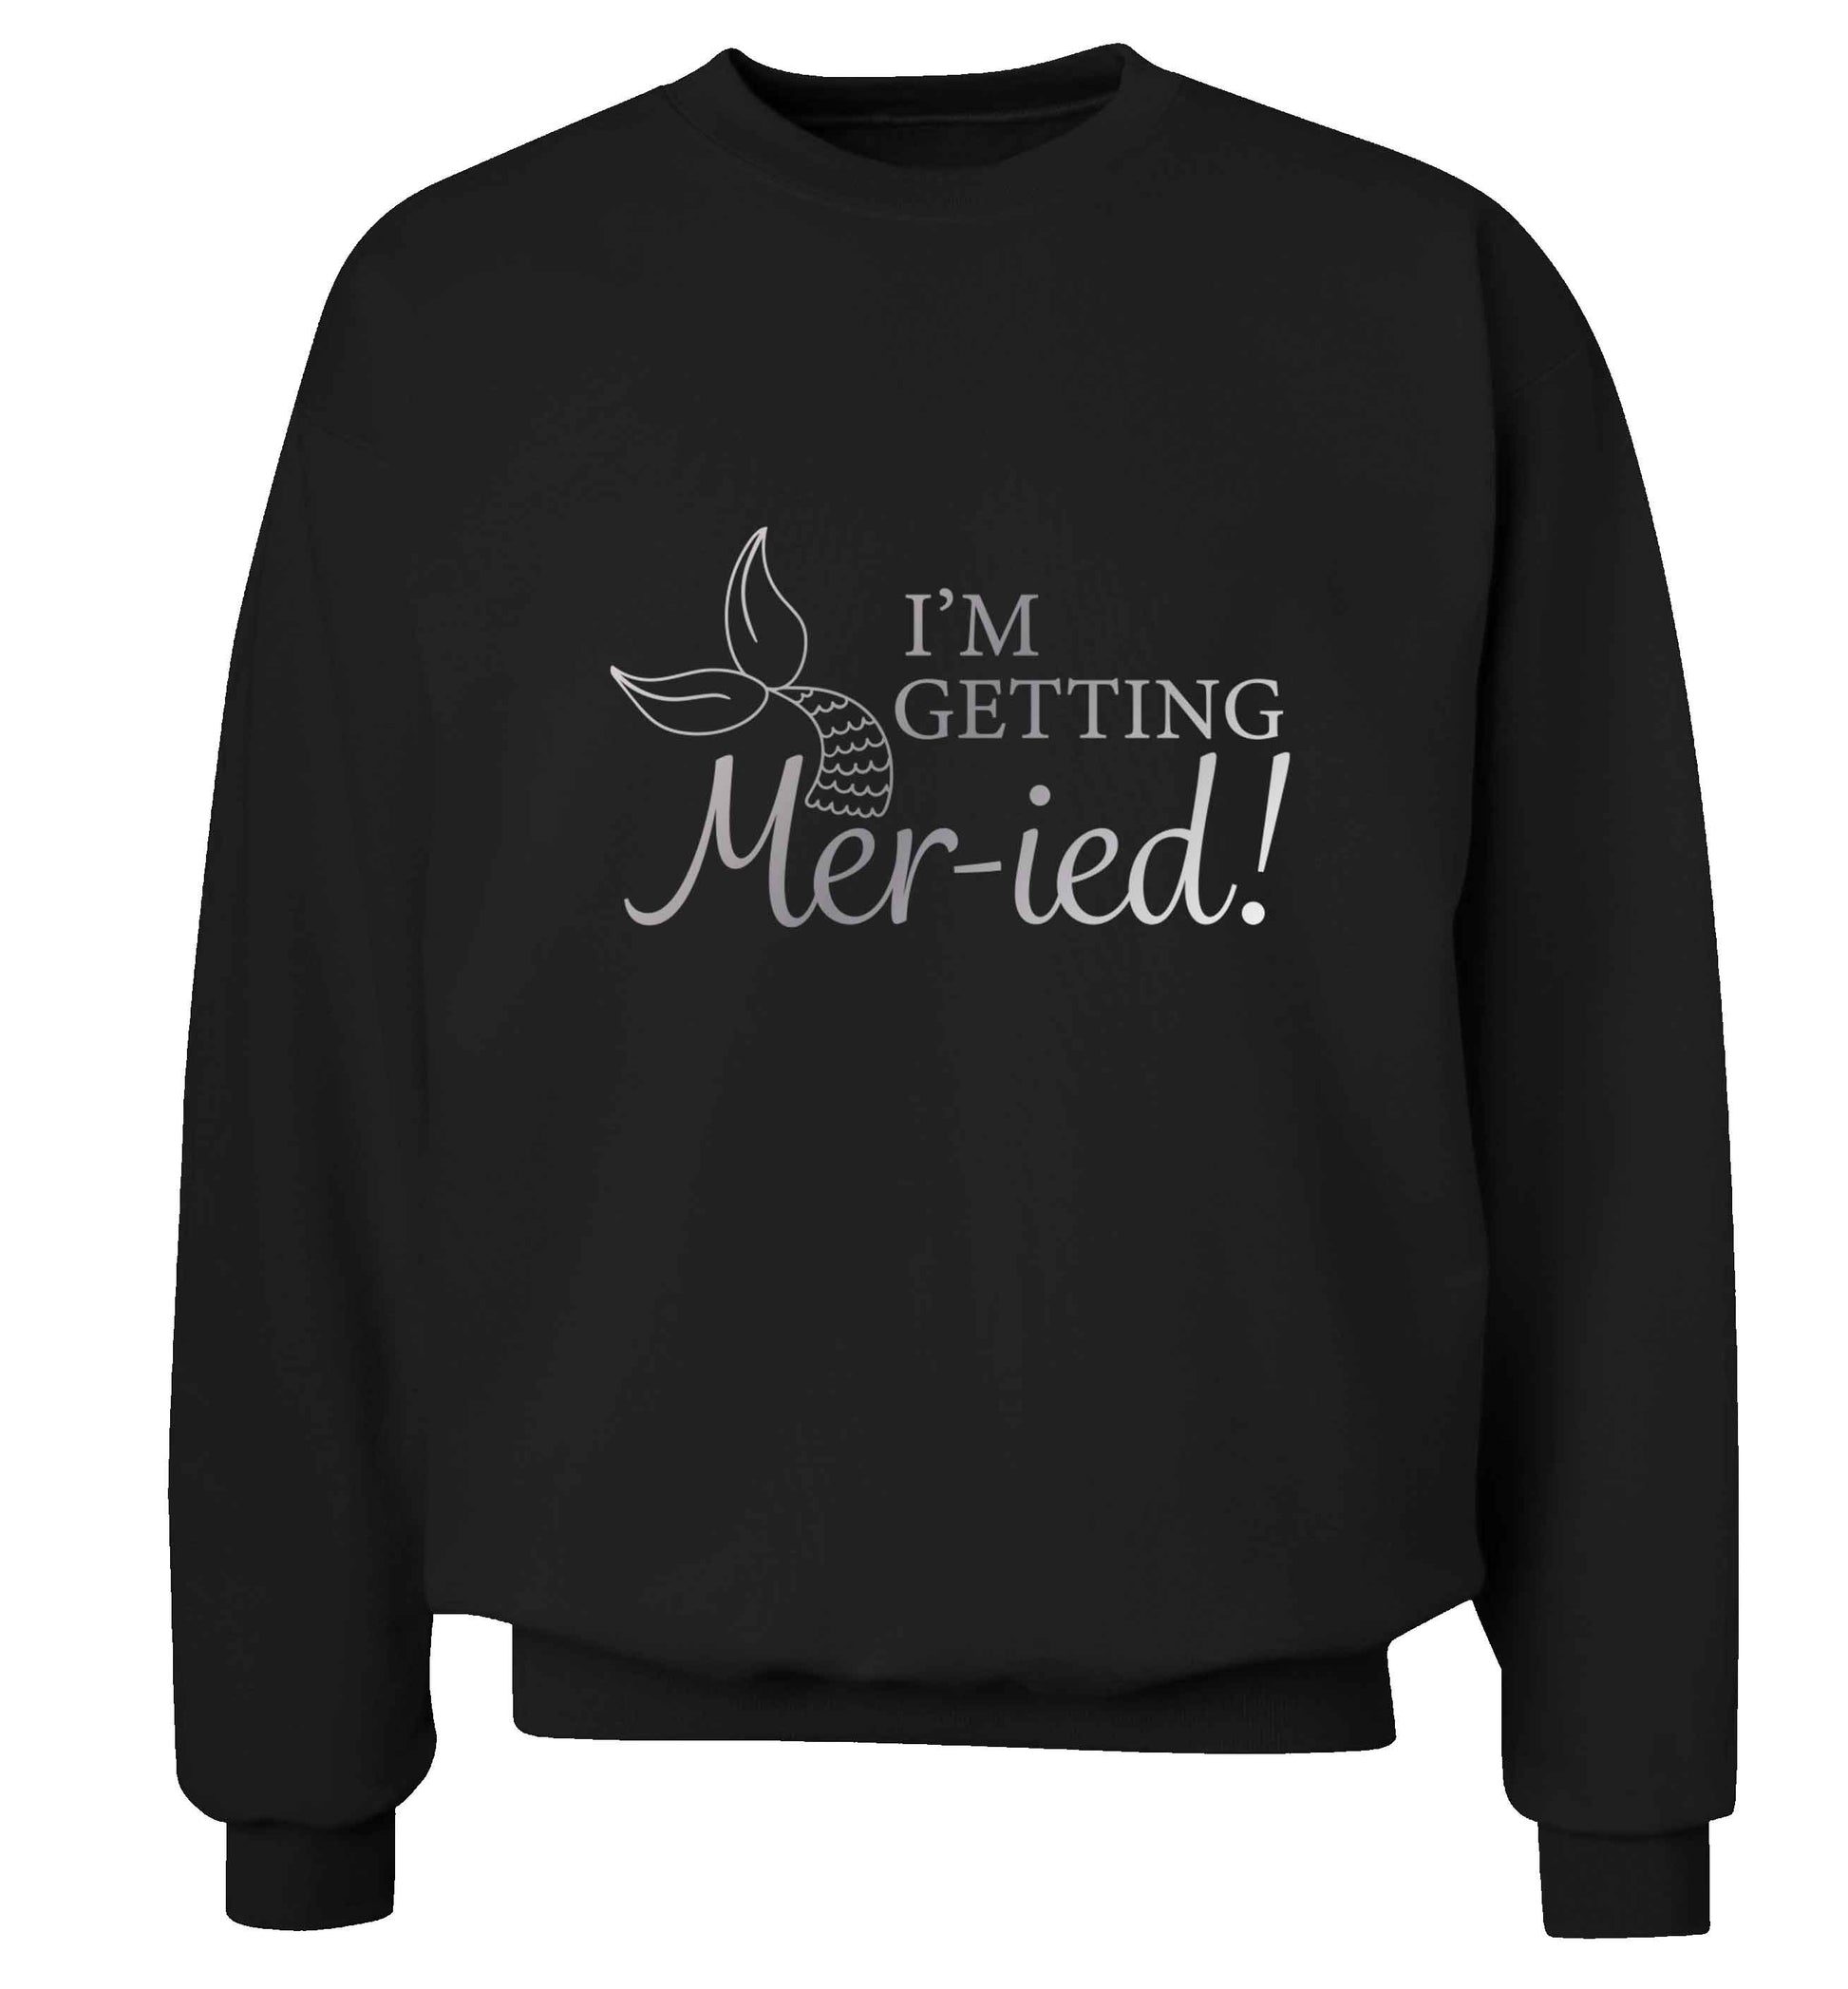 Personalised wedding thank you's Mr and Mrs wedding and date! Ideal wedding favours! adult's unisex black sweater 2XL